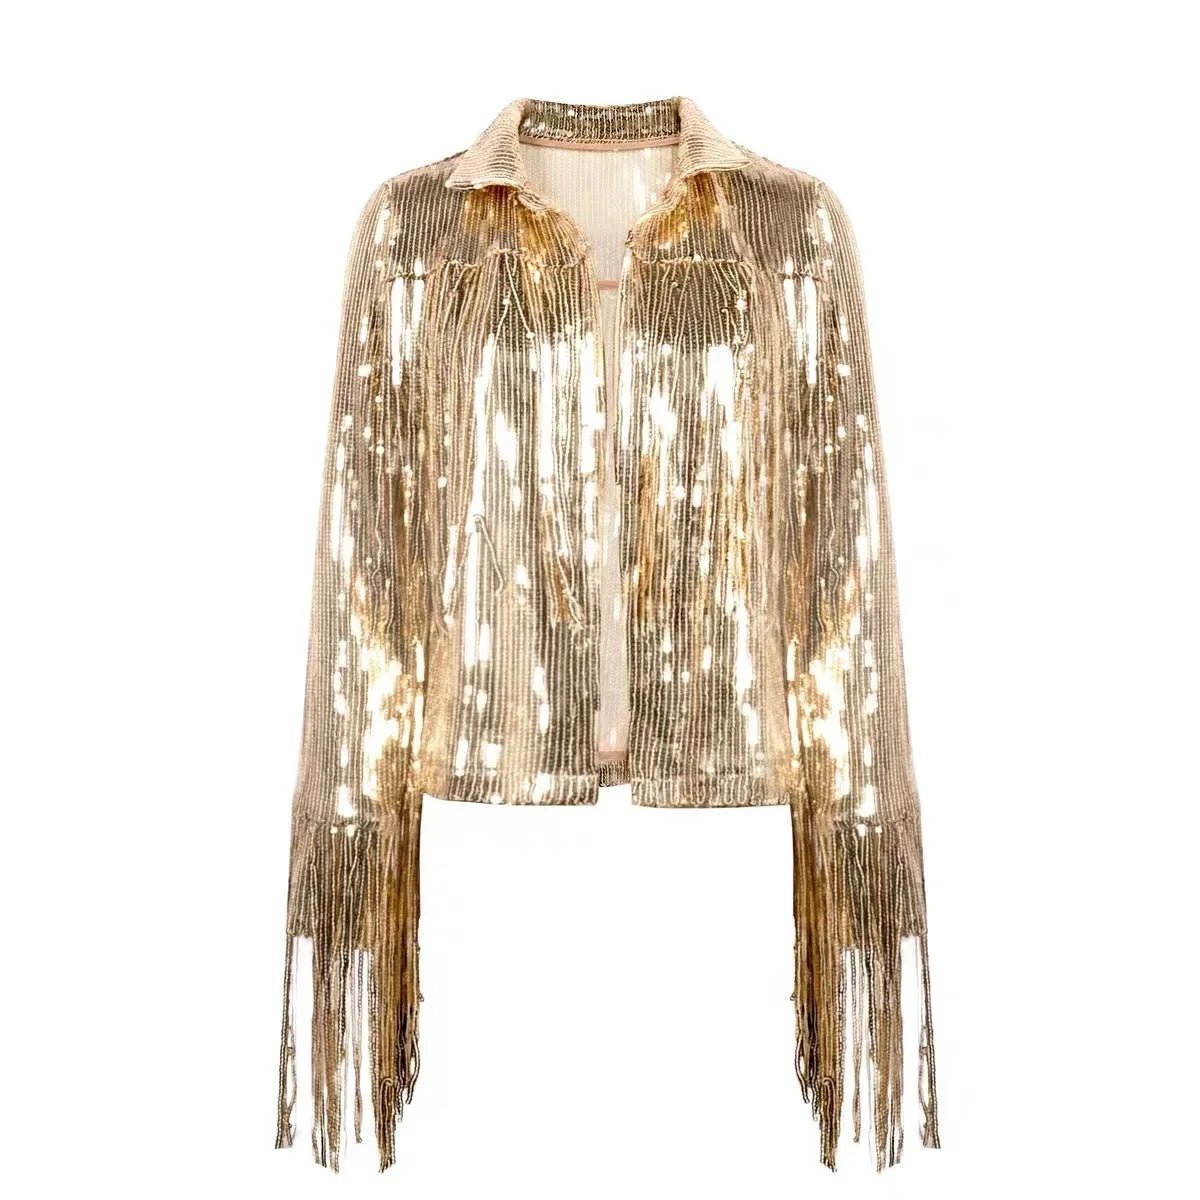 Glittering Tassel Top and Sequined Shorts - Kelly Obi New York